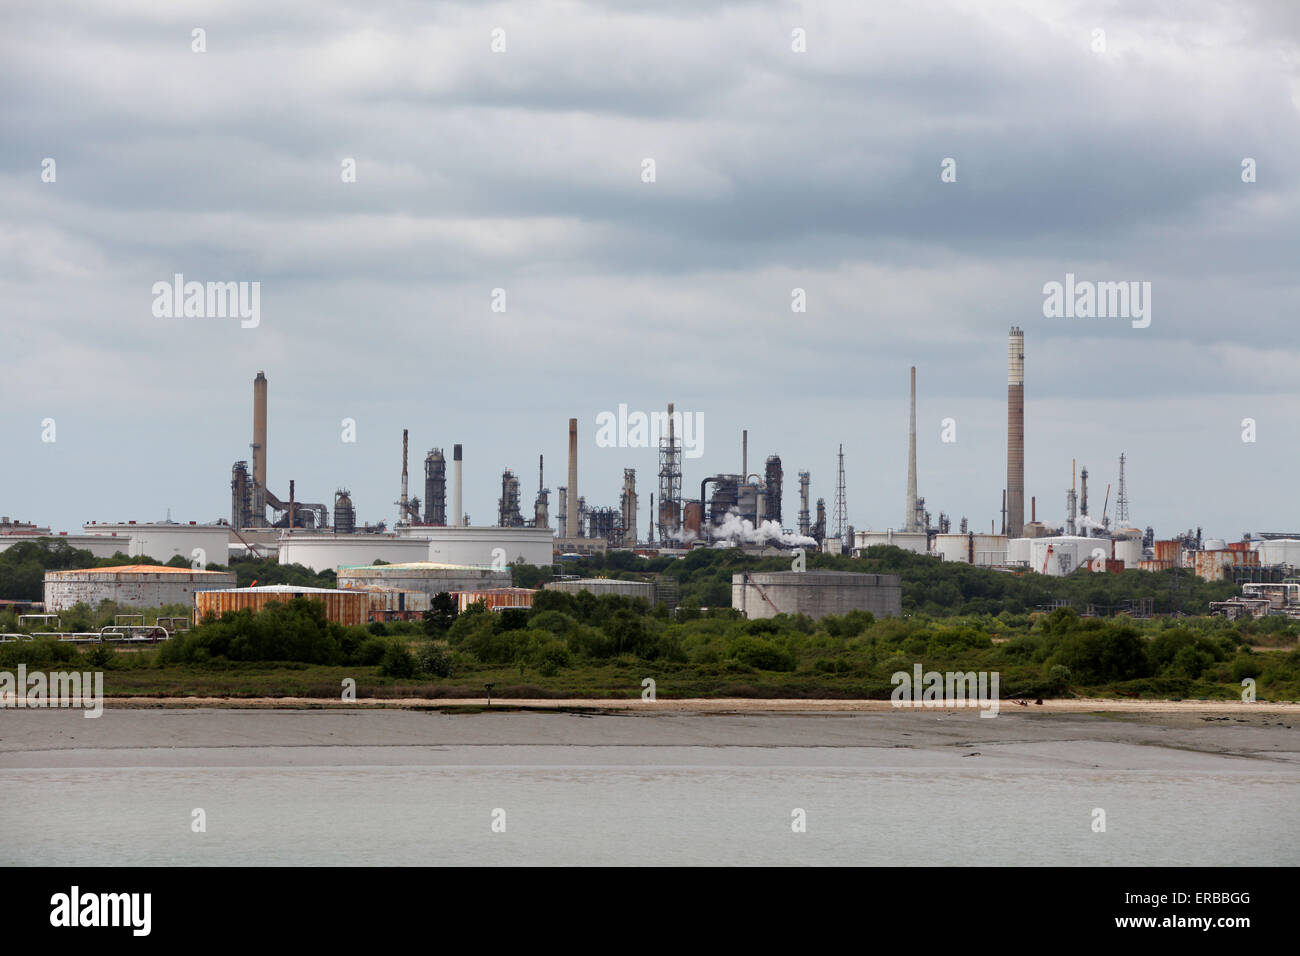 Fawley Refinery near Southampton the largest refinery in the UK Stock Photo